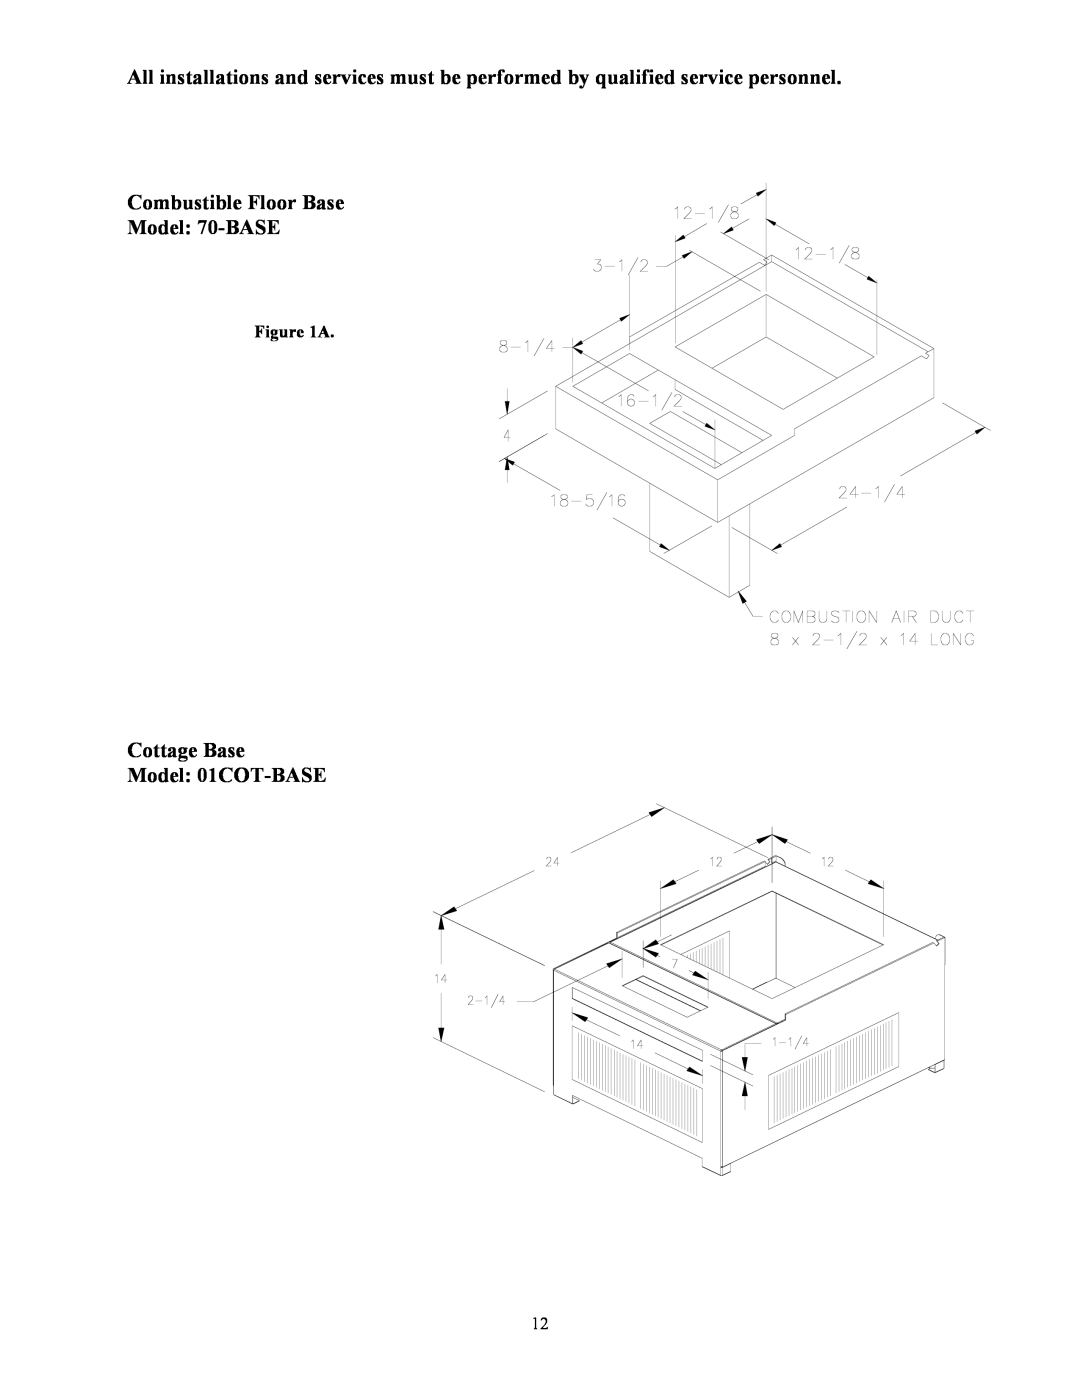 Thermo Products GMC-85, OMC-70 service manual Combustible Floor Base Model 70-BASE, Cottage Base Model 01COT-BASE 